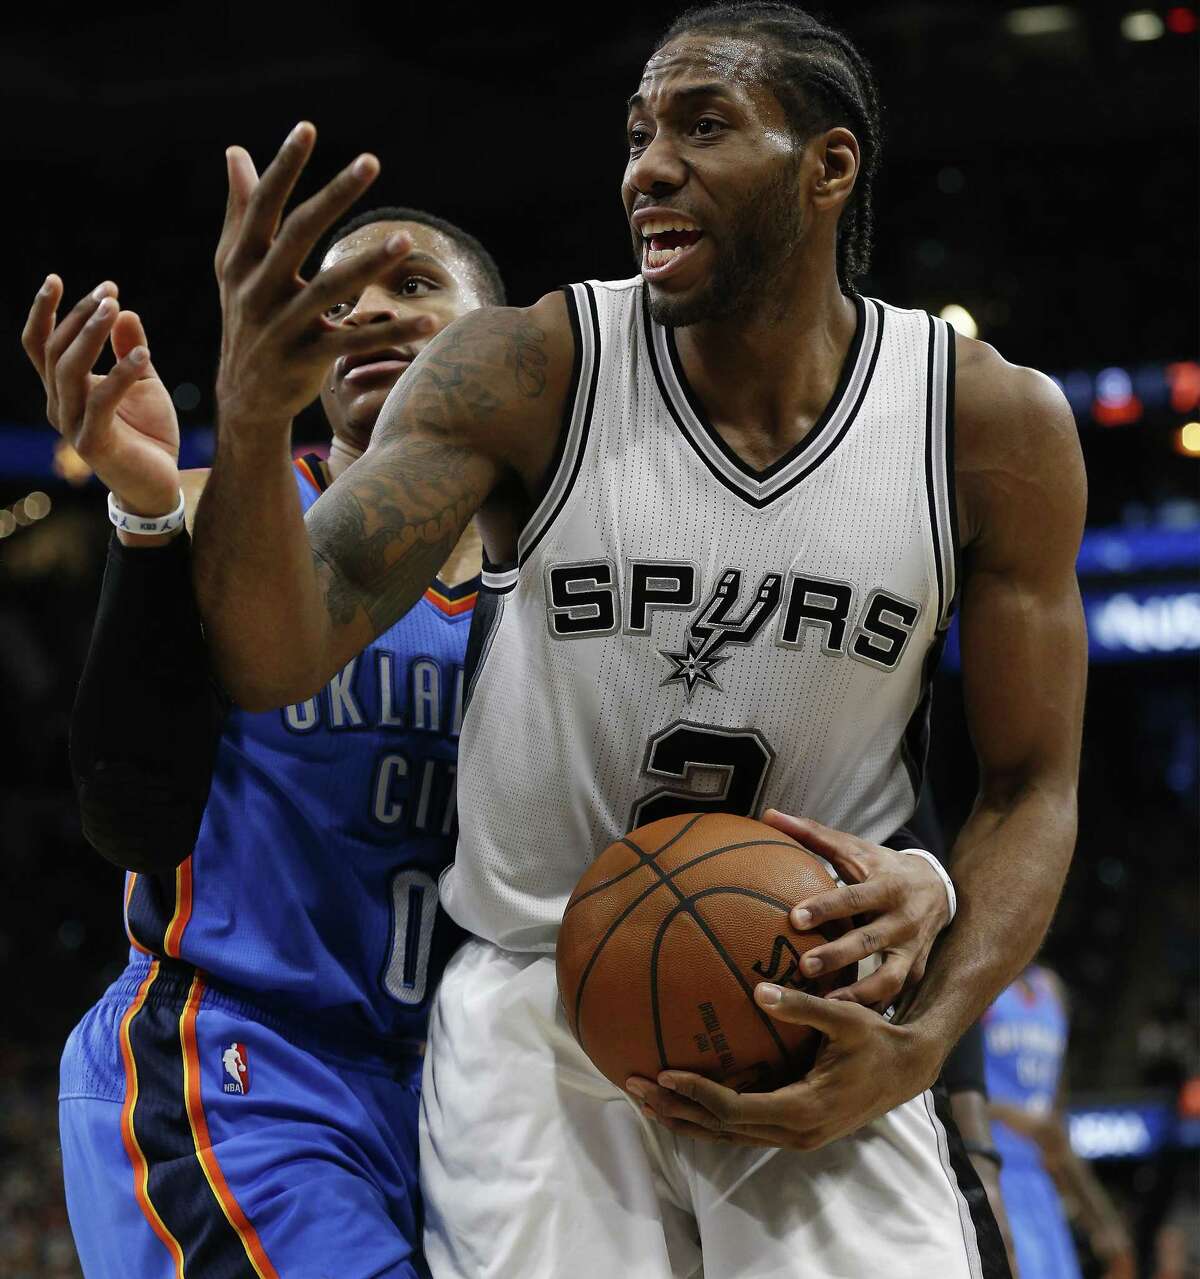 Spurs’ Kawhi Leonard pleads for a call against the Oklahoma City Thunder’s Russell Westbrook at the AT&T Center on Jan. 31, 2017.